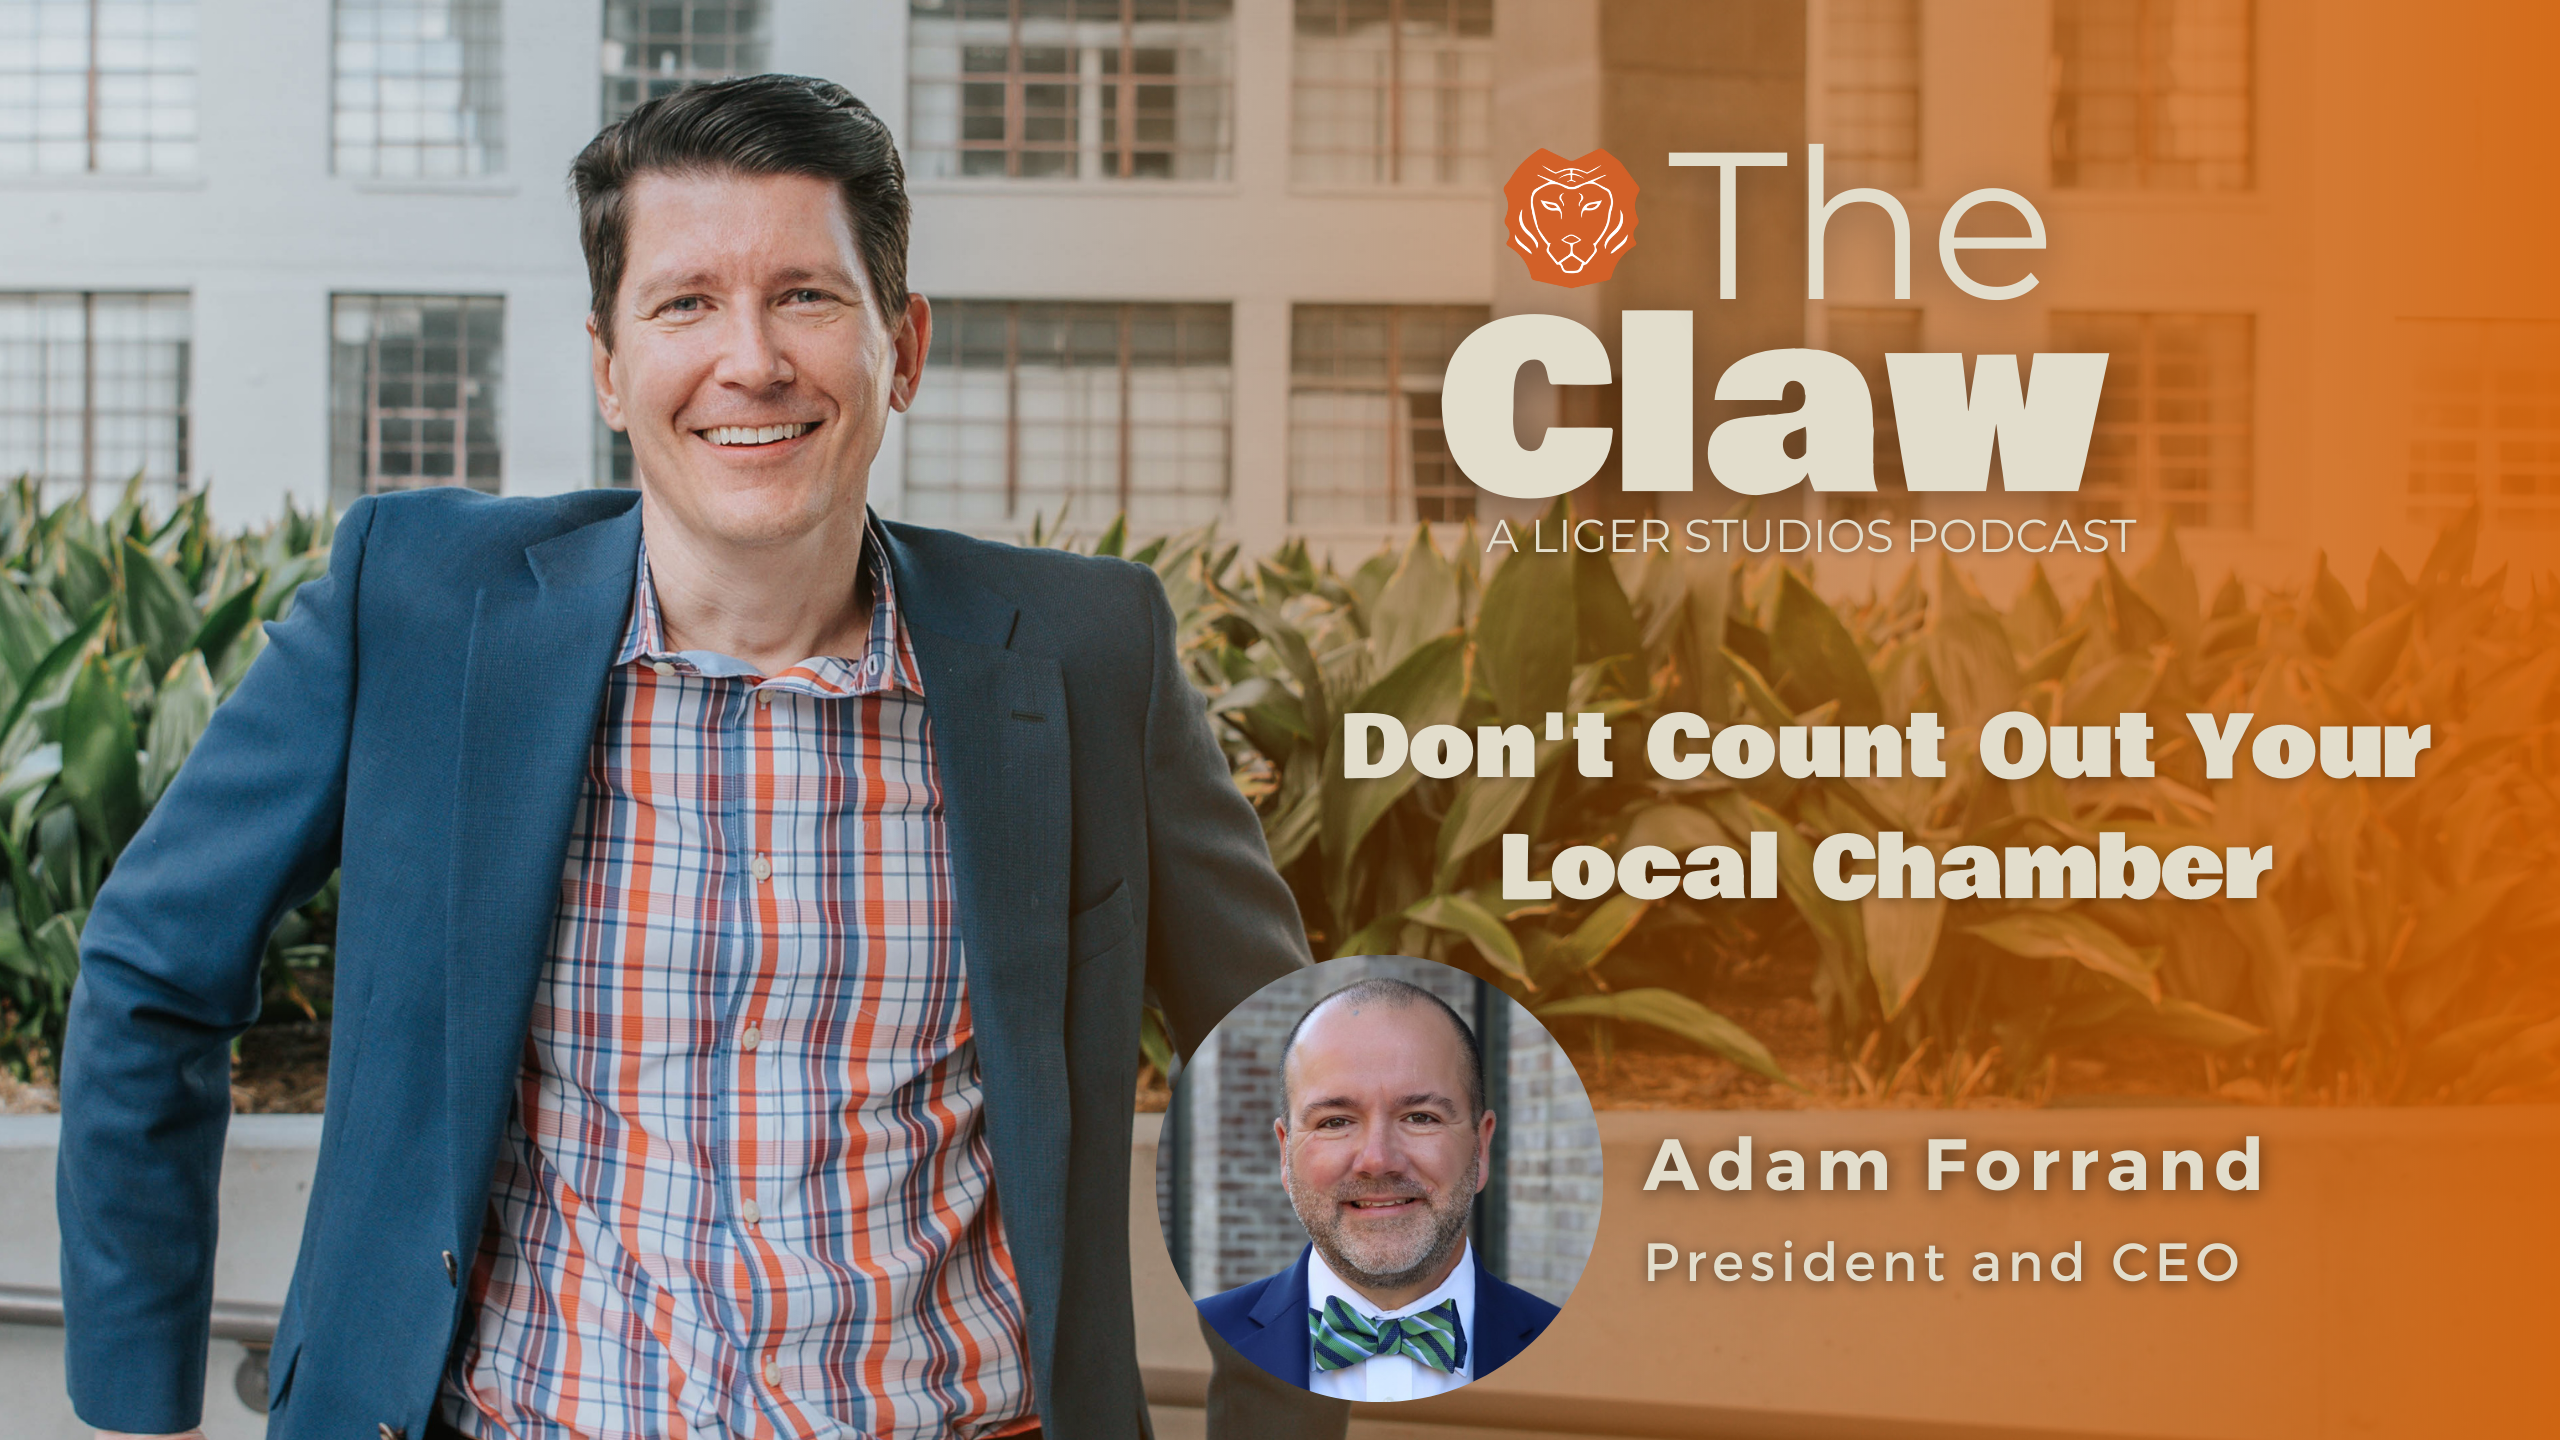 The Claw Podcast: Don’t Count Out Your Local Chamber with Adam Forrand